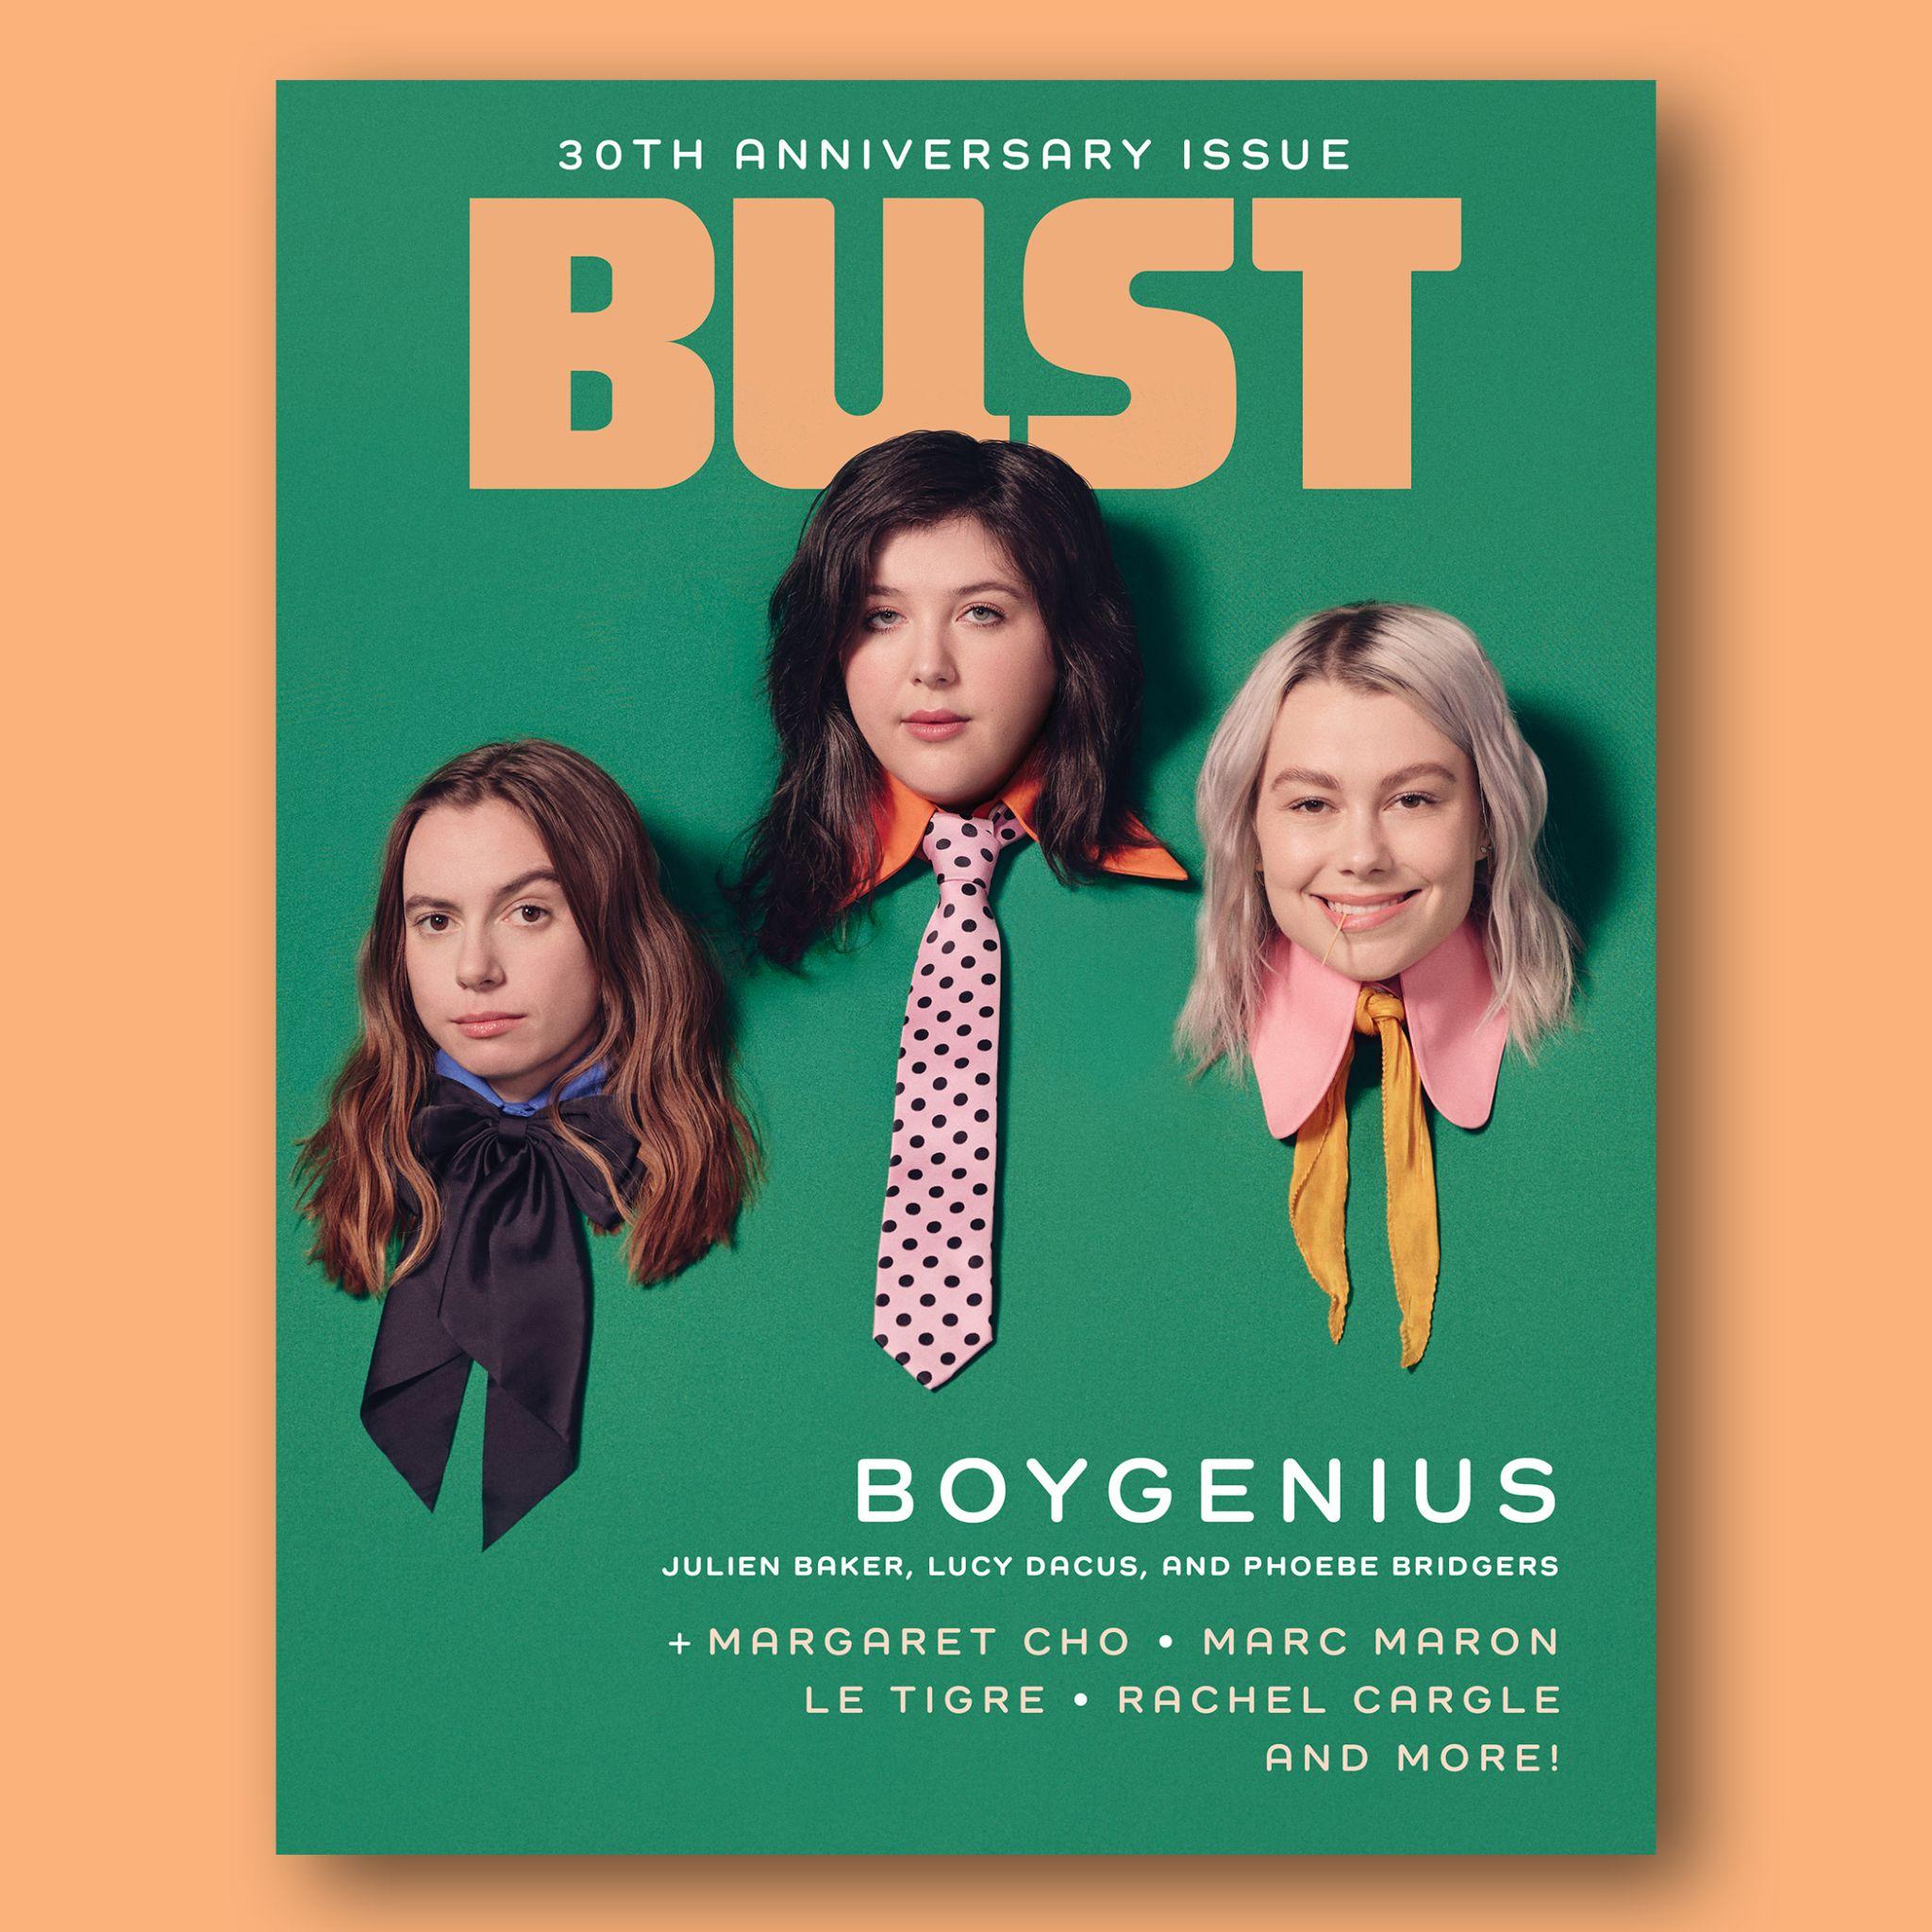 BUST's 30th Anniversary Issue Features Boygenuis, Margaret Cho, and Zany  Summer Accessories - BUST